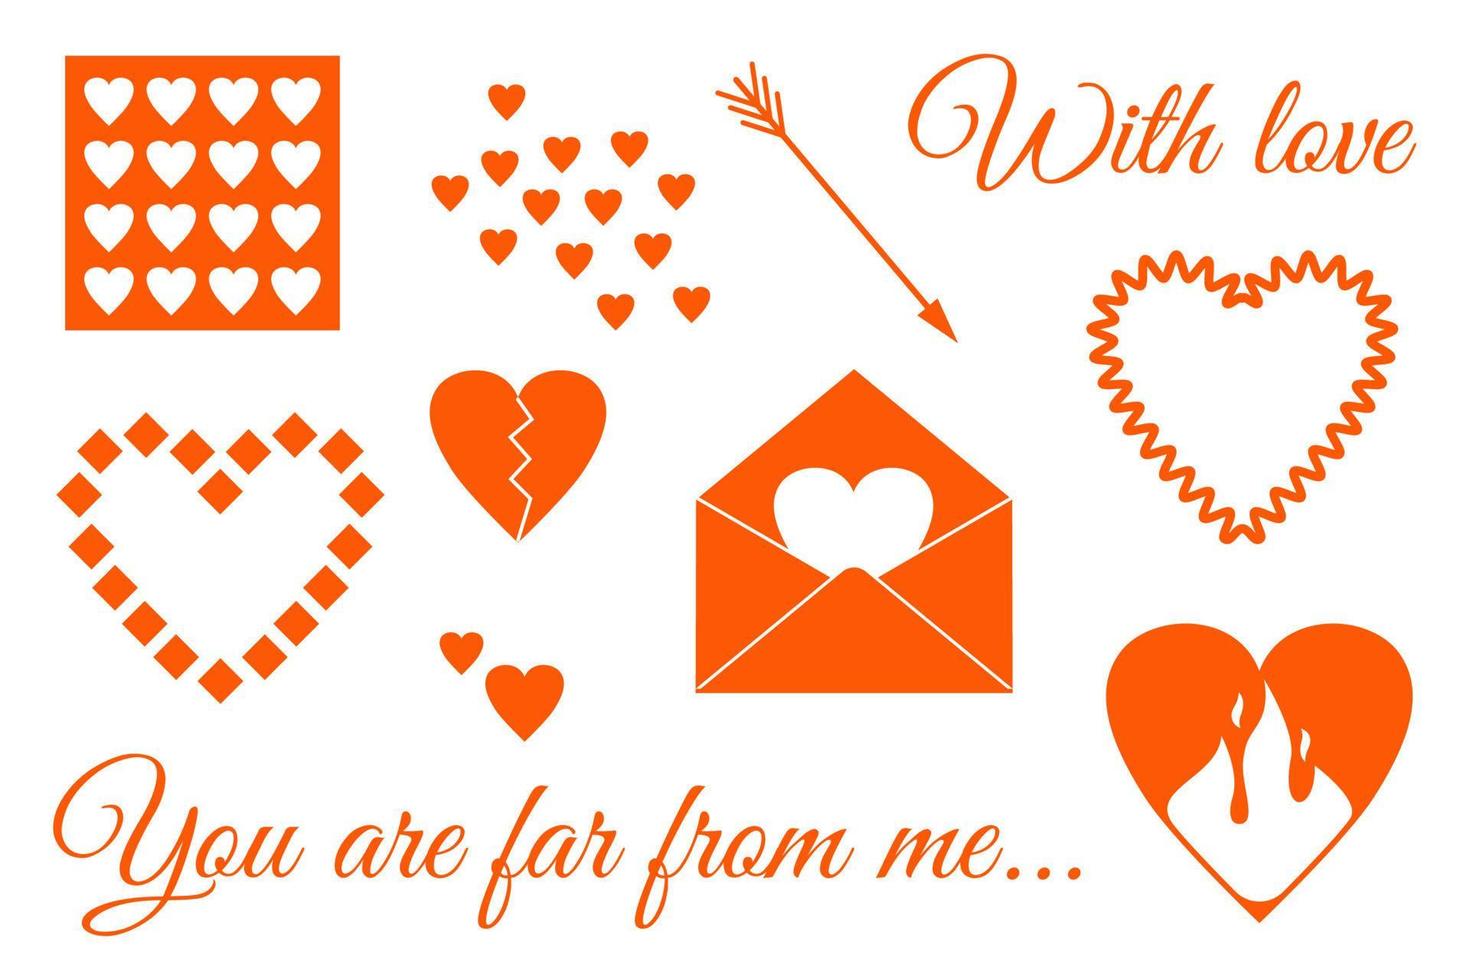 Set of romantic elements for Valentine's Day. Envelope with heart, arrow, fire. Icons of symbol of love. Vector illustration of different hearts. Text design.